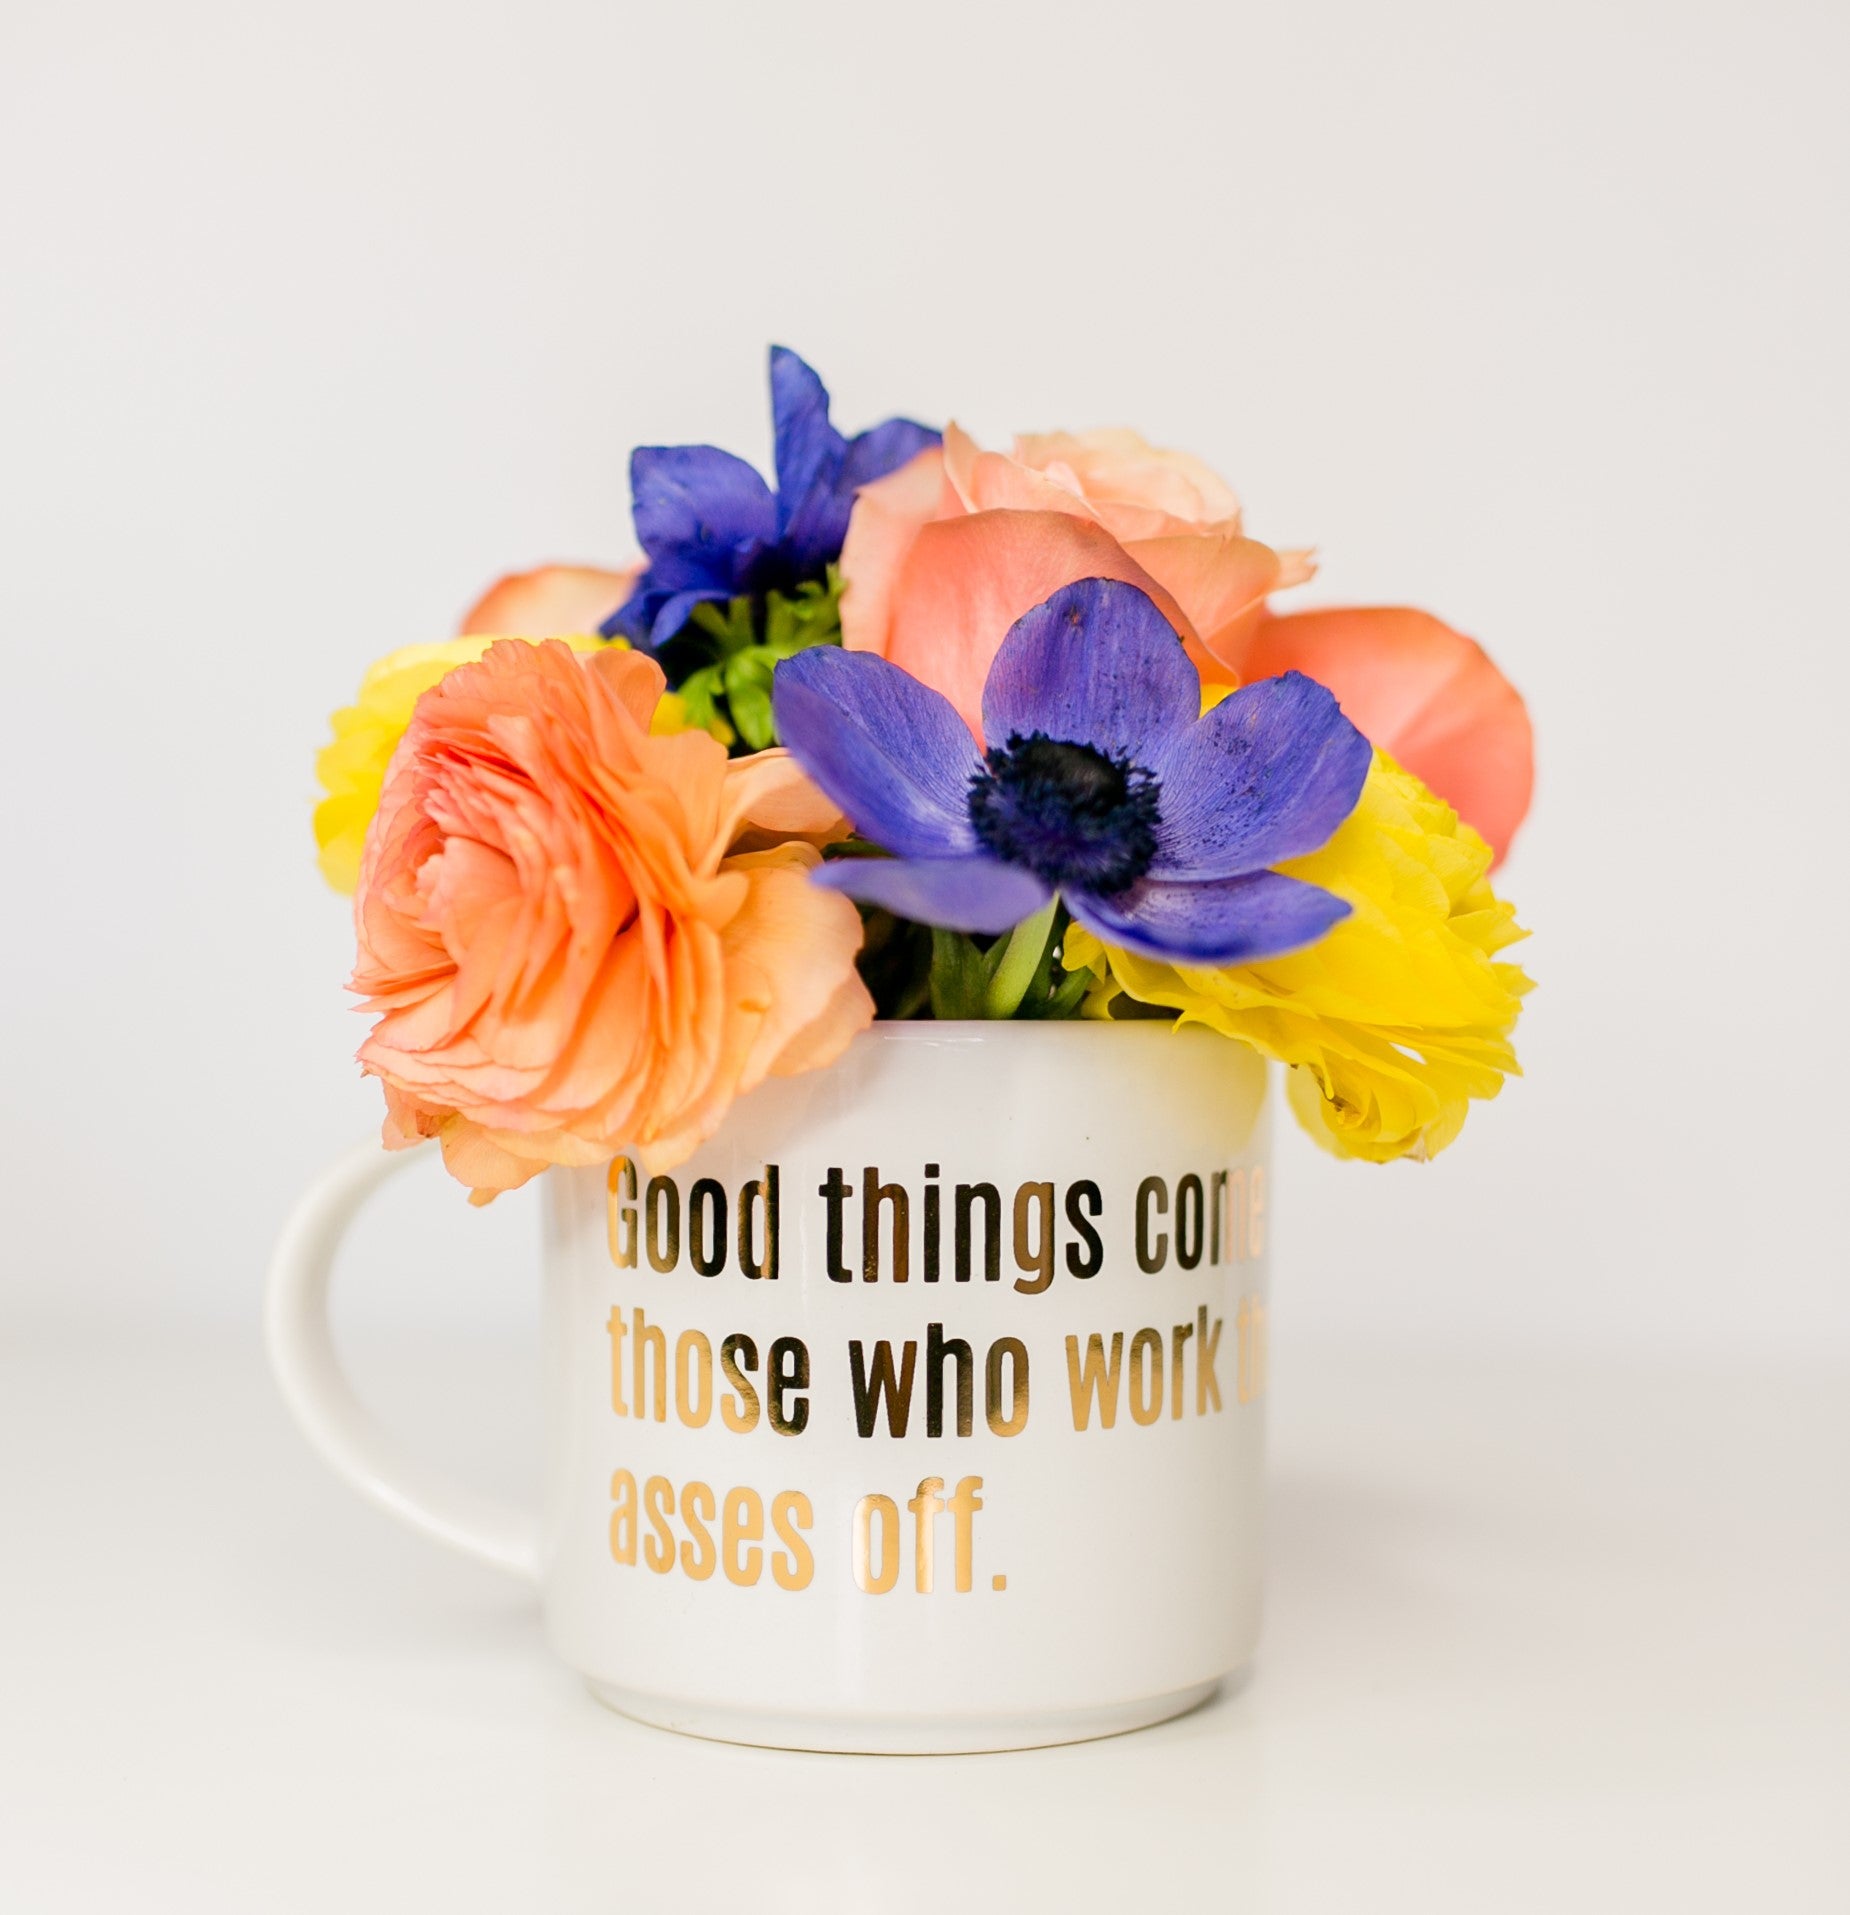 Chez Gagne Chez Gagné Good Things Come to Those Who Work Their Asses Off Gold Metallic Mug